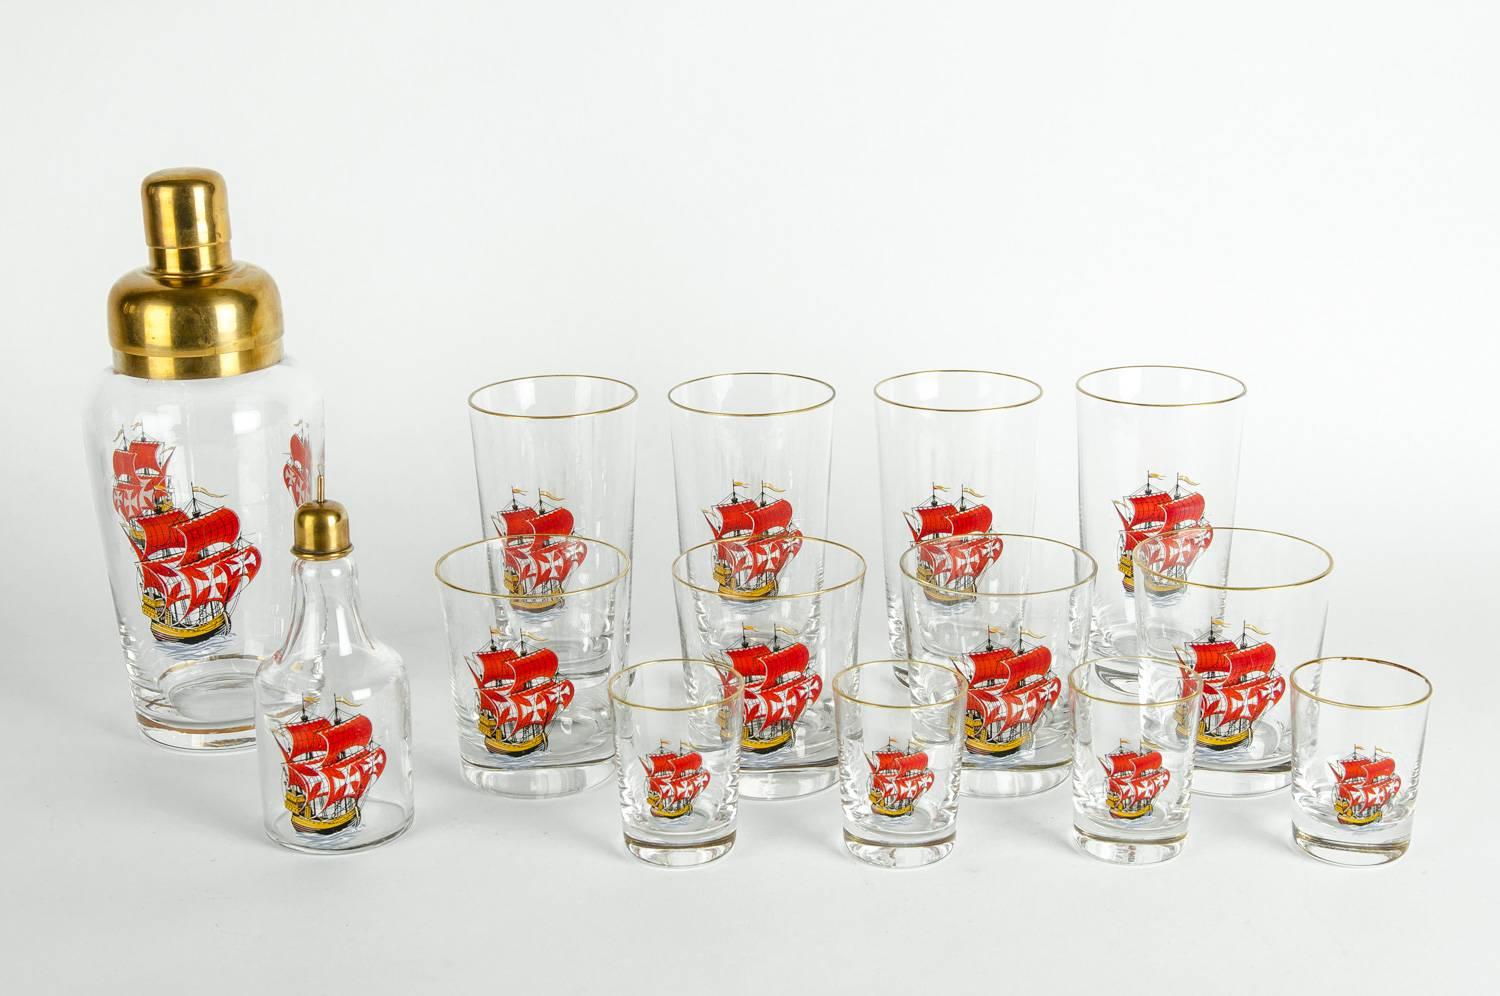 Mid-20th century barware / tableware 14 pieces cocktail shaker service with red sailing boat design details and gold trimmed top. Each piece is in great vintage condition. Minor wear consistent with age / use. The shaker is 9 inches high x 4 inches